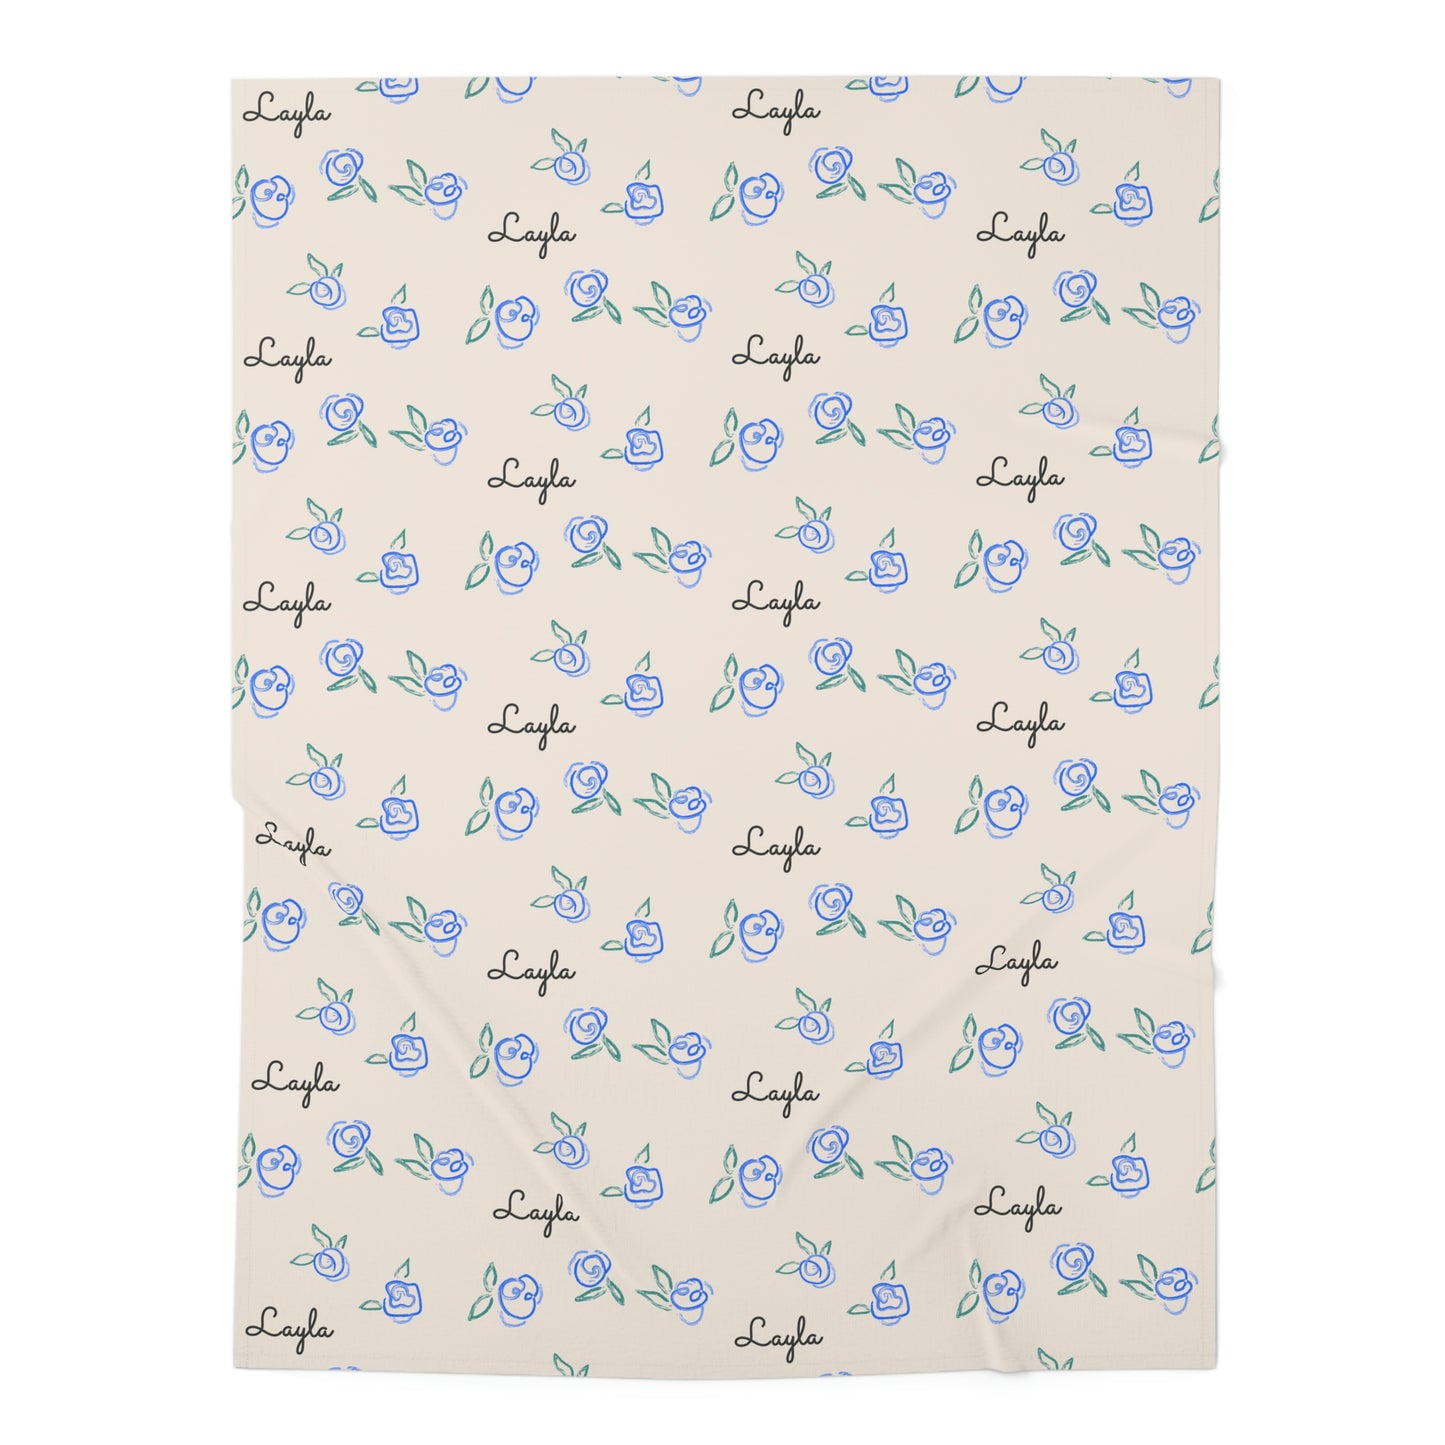 Jersey personalized baby blanket in blue rose pattern laid flat